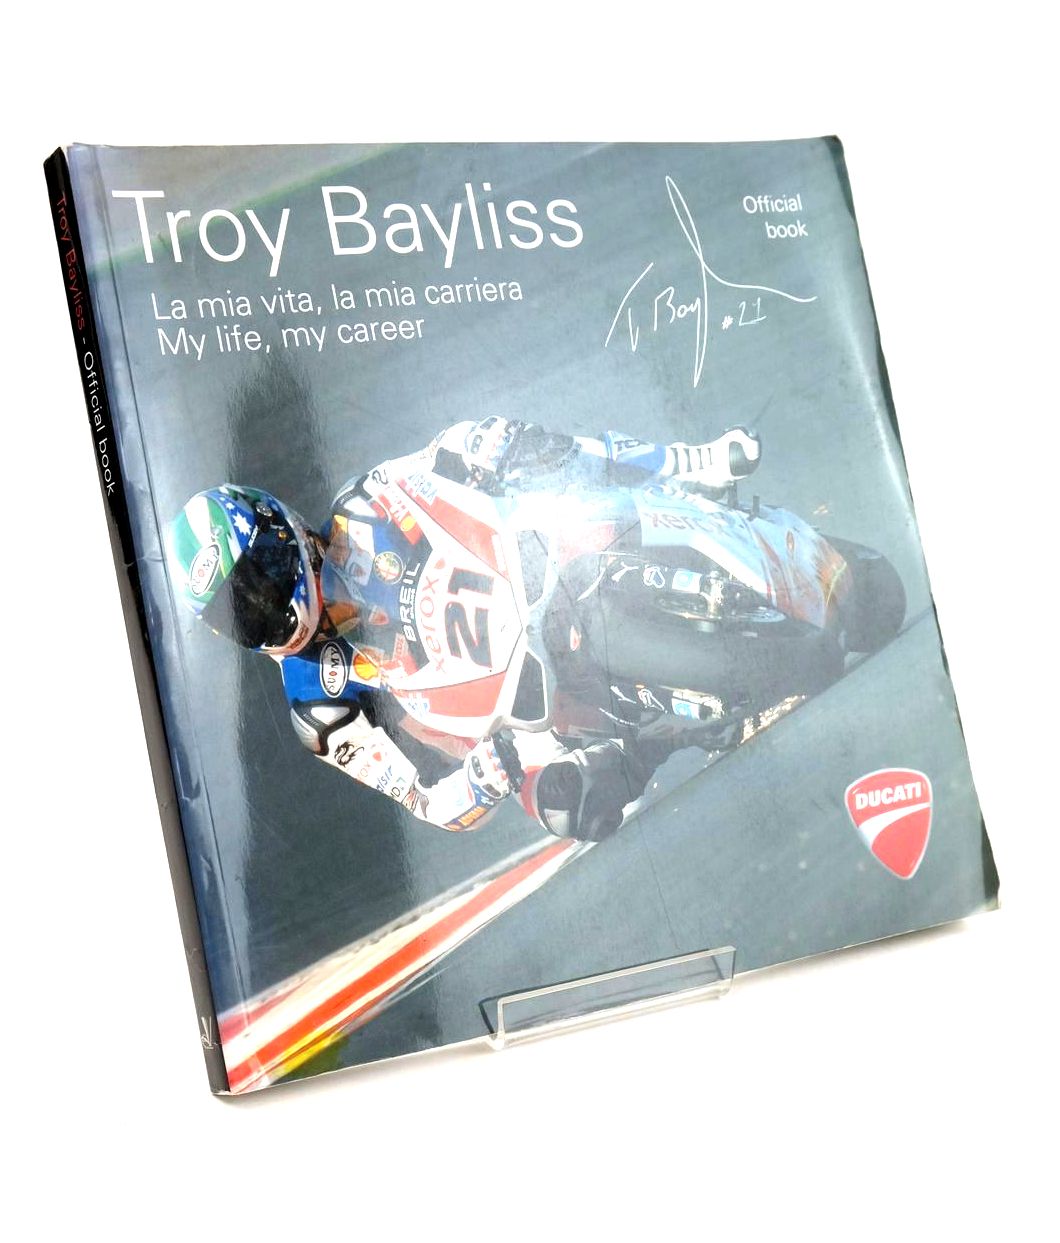 Photo of TROY BAYLISS OFFICAL BOOK - MY LIFE, MY CAREER written by Bayliss, Troy et al, published by Editvallardi (STOCK CODE: 1324094)  for sale by Stella & Rose's Books